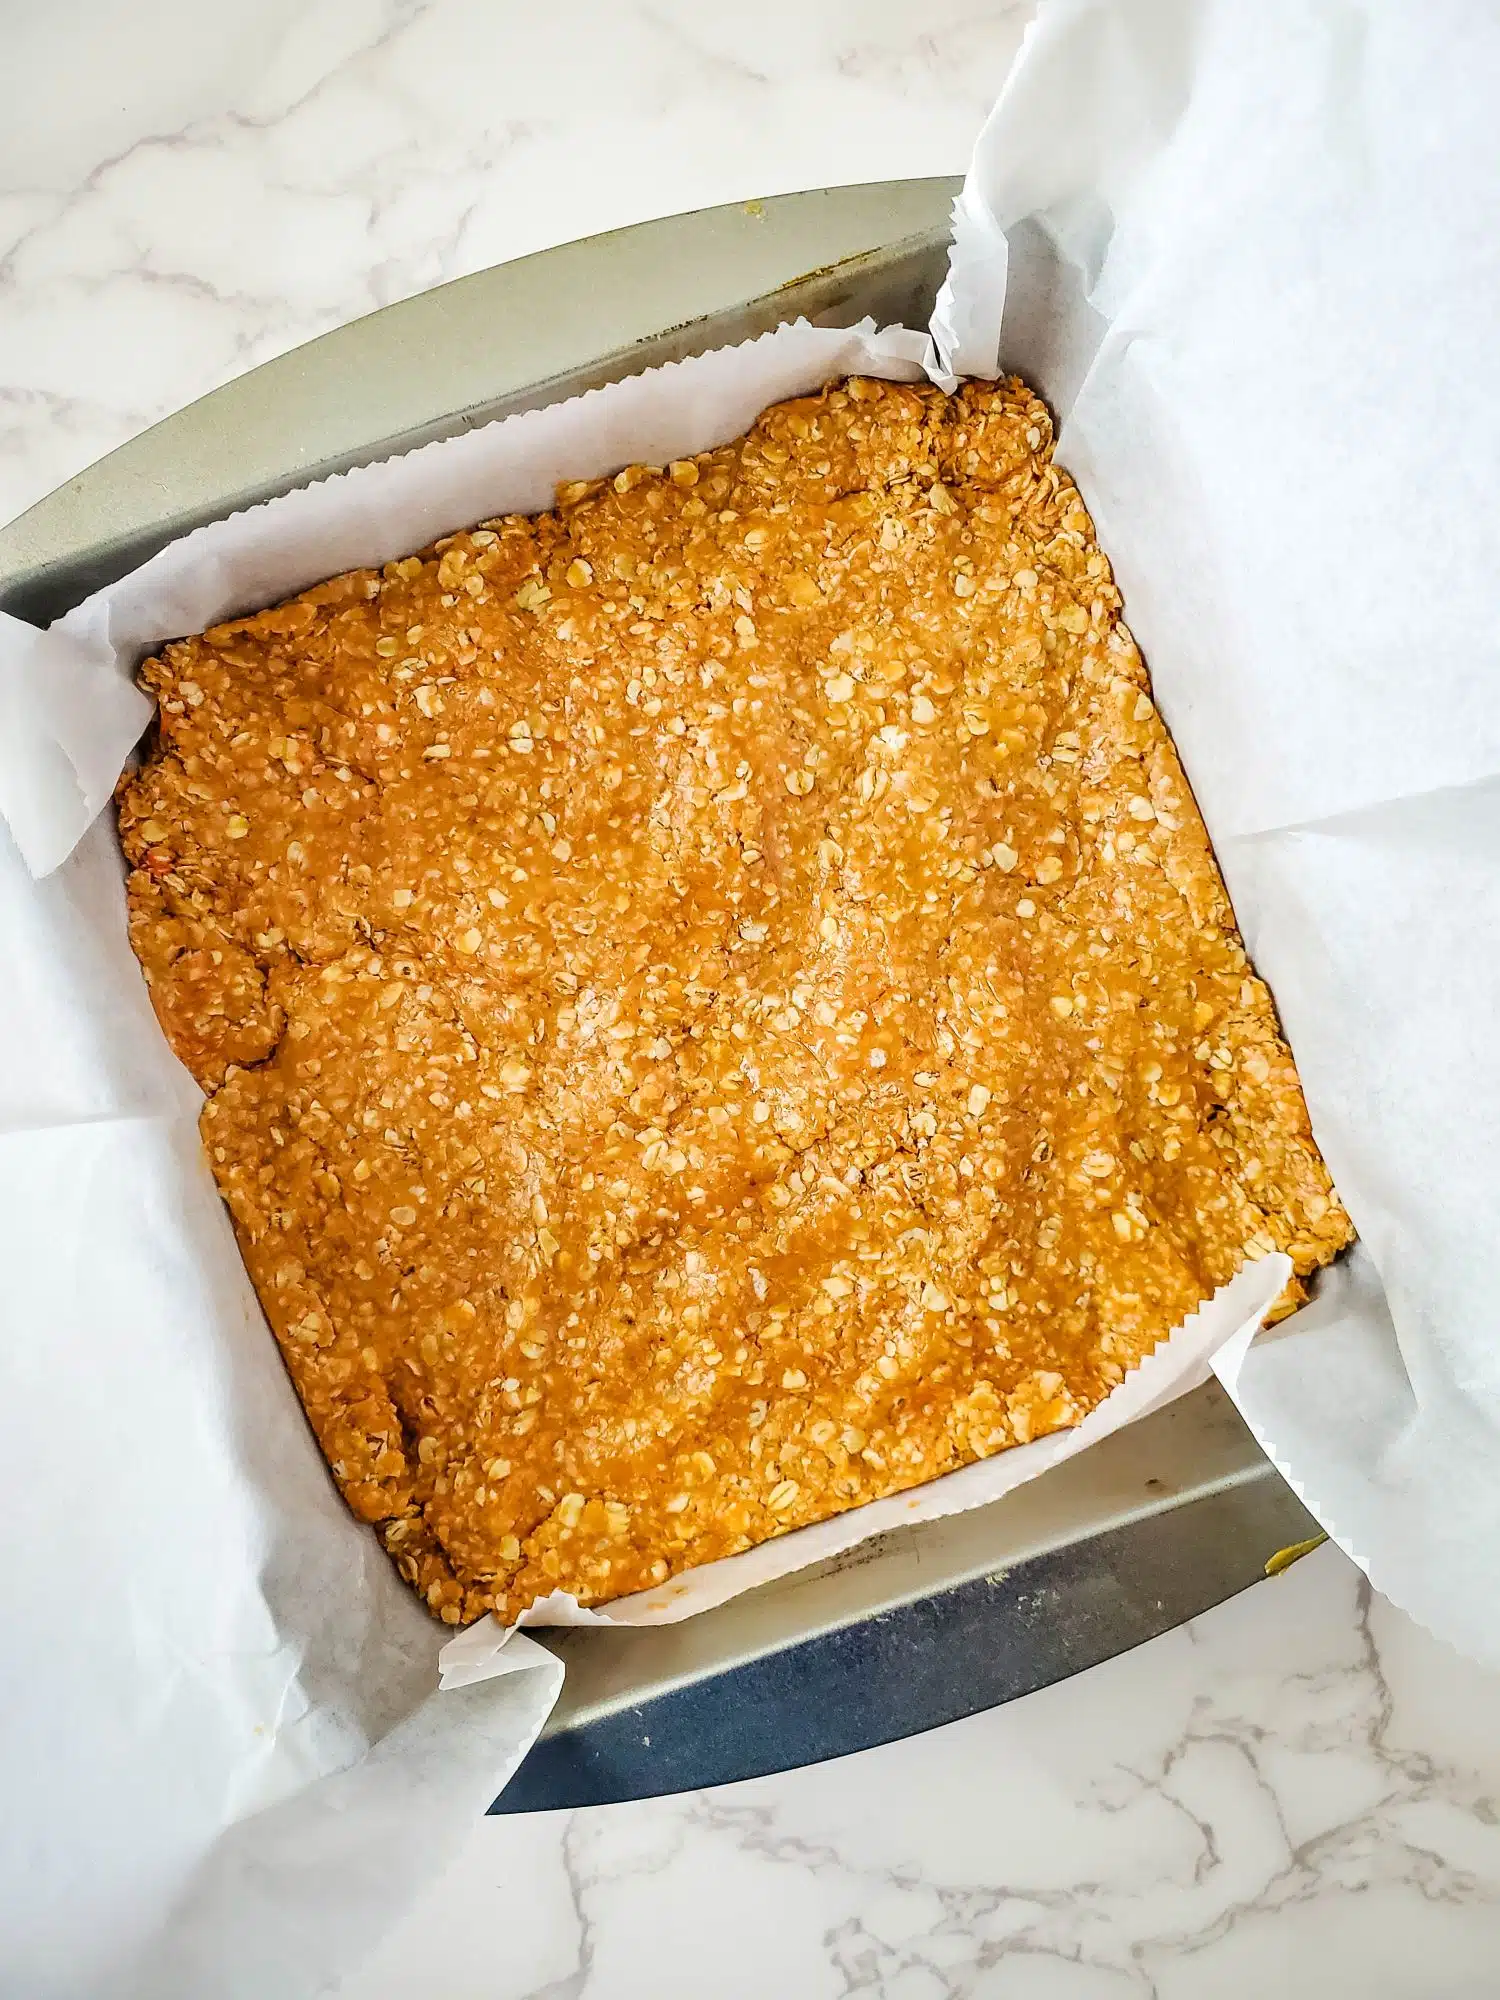 A square of granola in a baking pan.